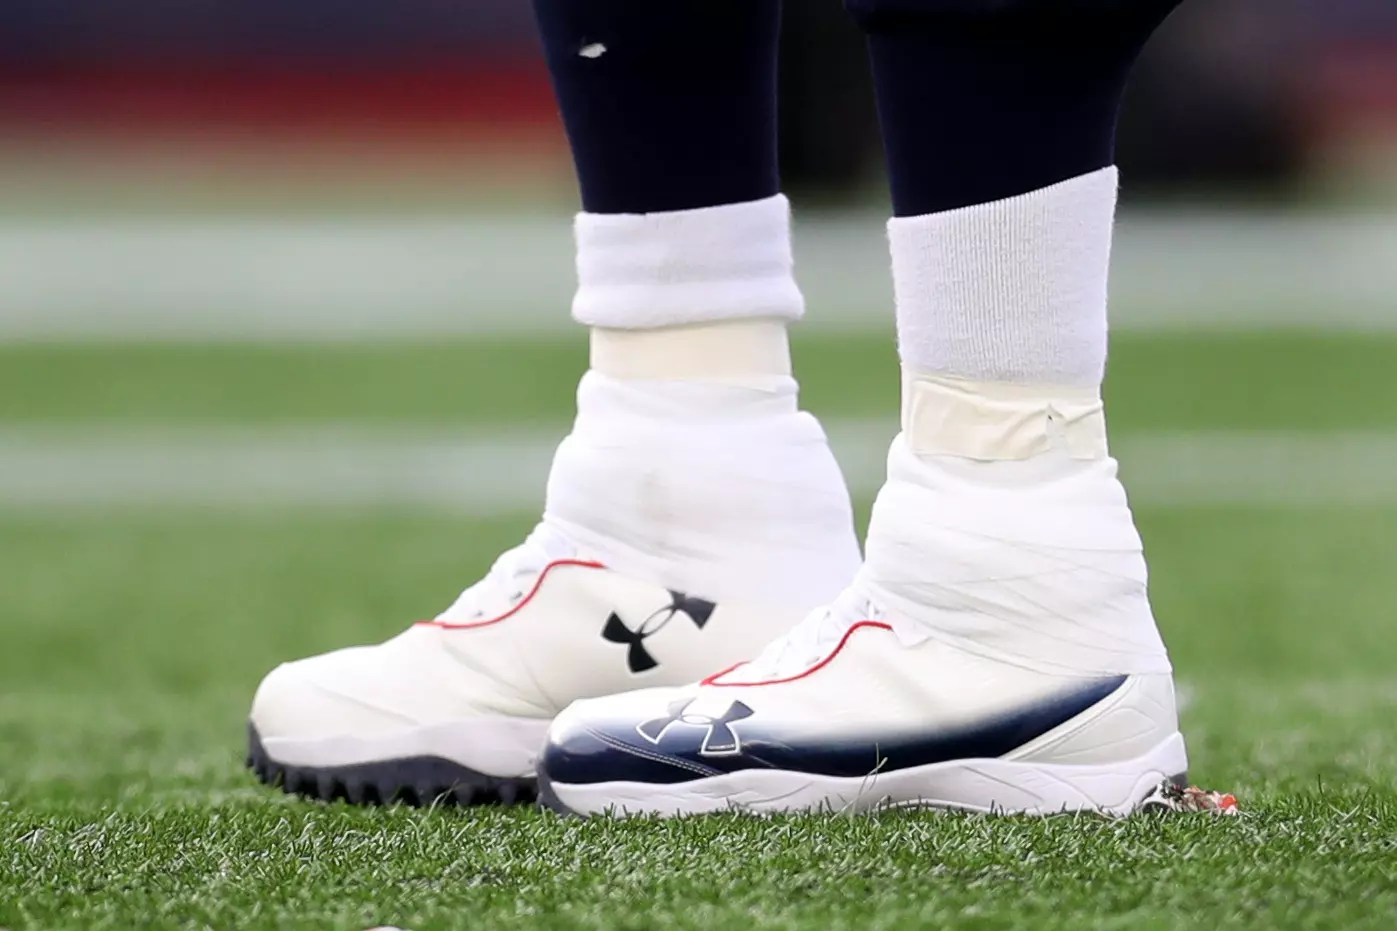 WATCH: Tom Brady Talks About White Shoes, Saturday's Game